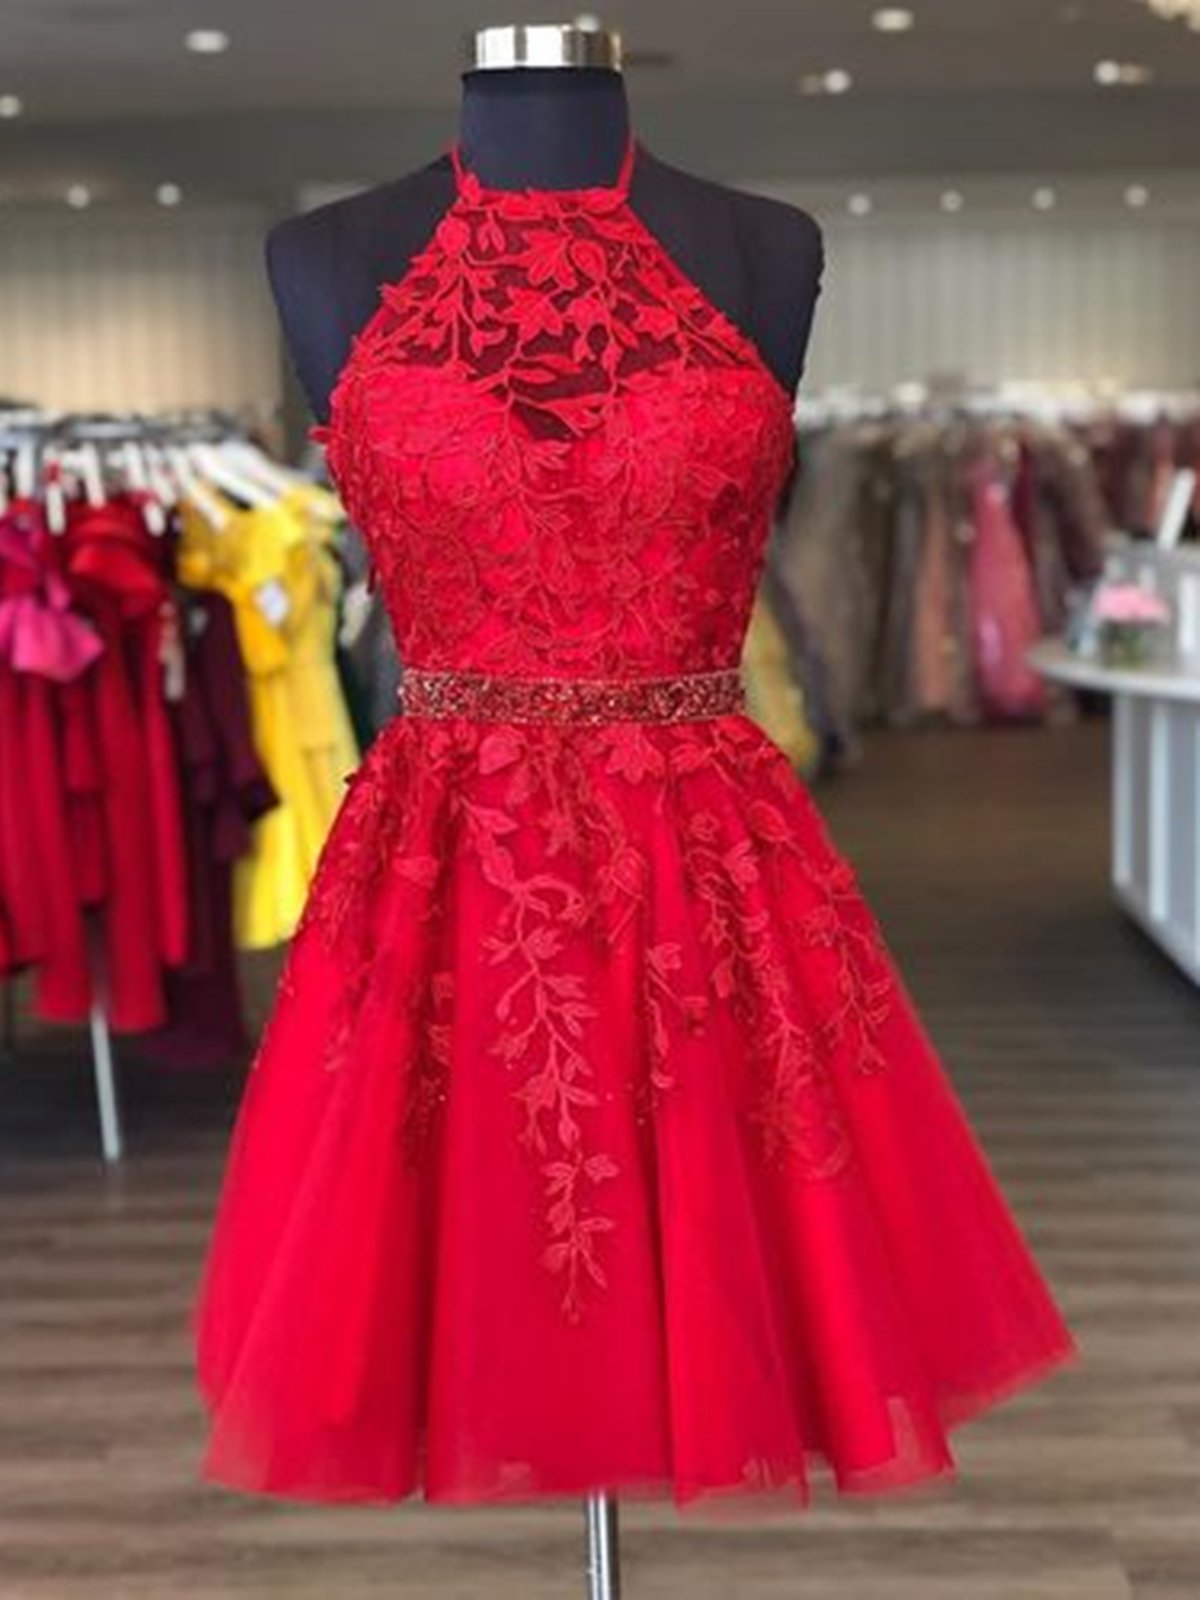 Halter Neck Short Red Lace Prom Dresses, Short Red Lace Formal Homecoming Dresses